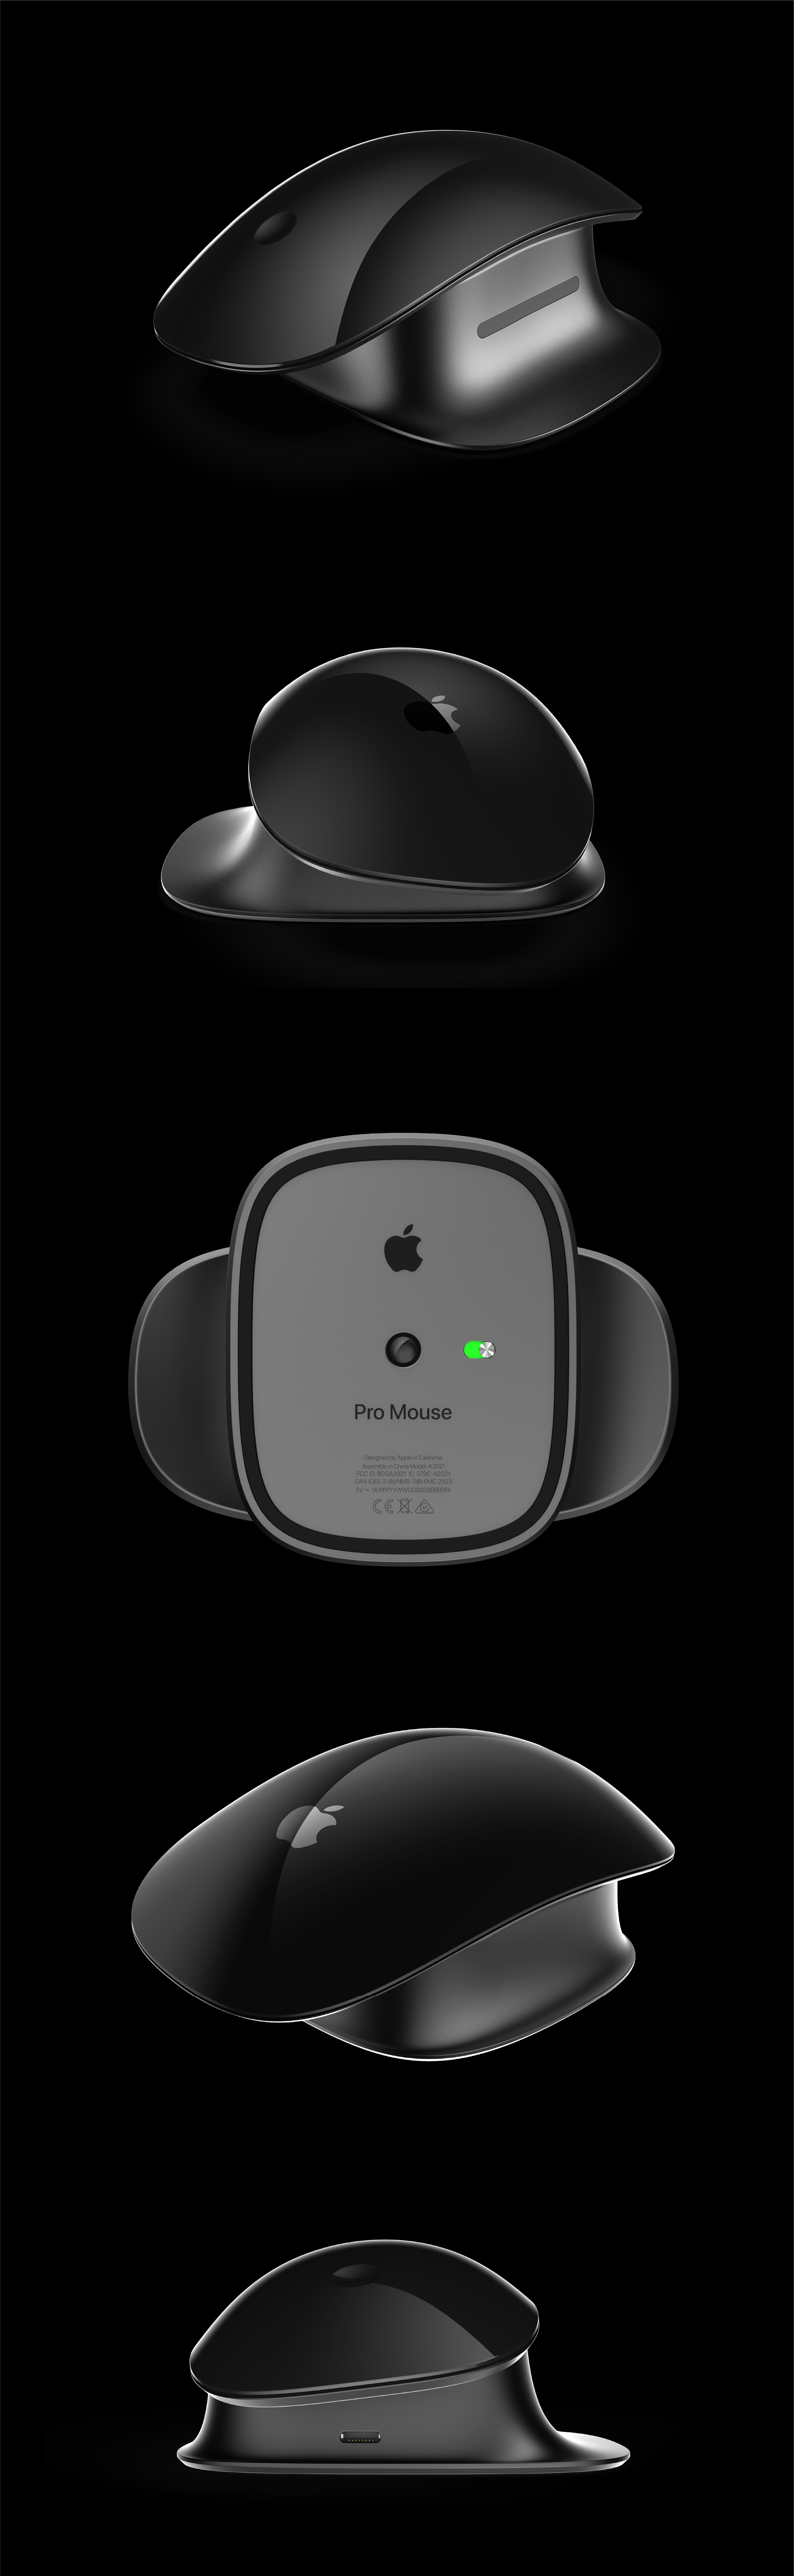 Check Out This Apple Pro Mouse Concept [Images]